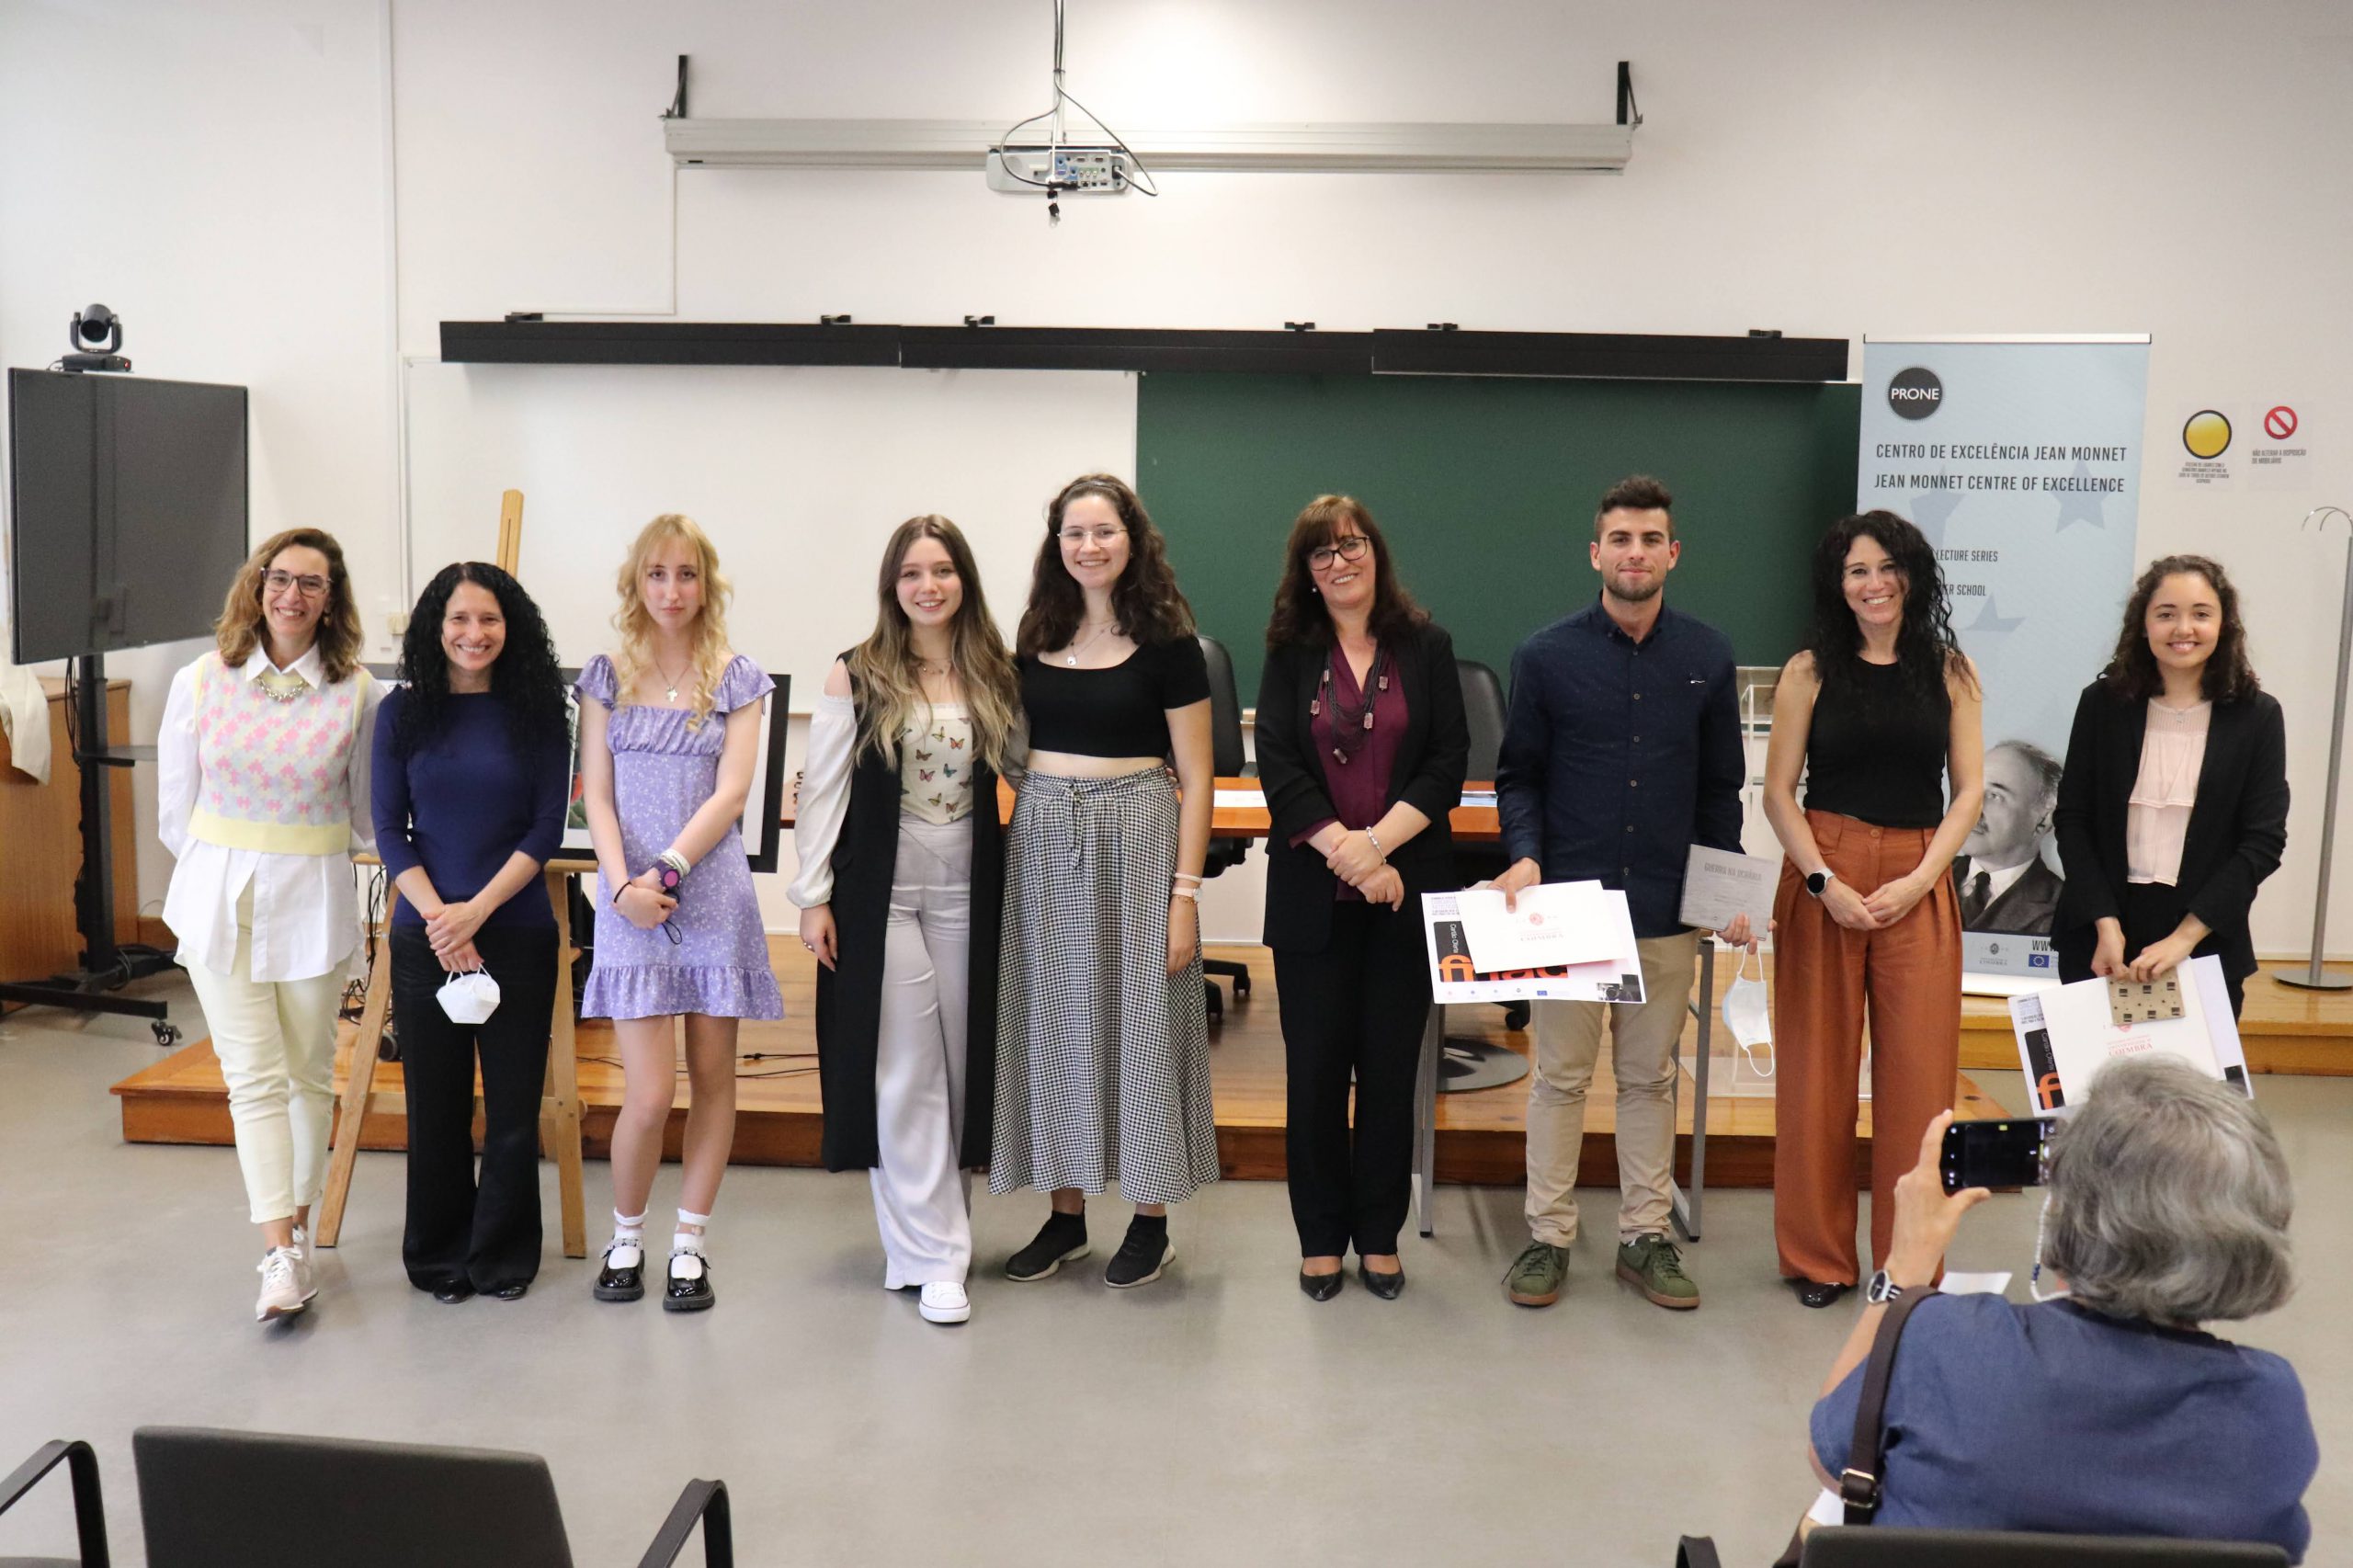 Awarded students receive prizes from the Centre of Excellence Artistic Contest at FEUC